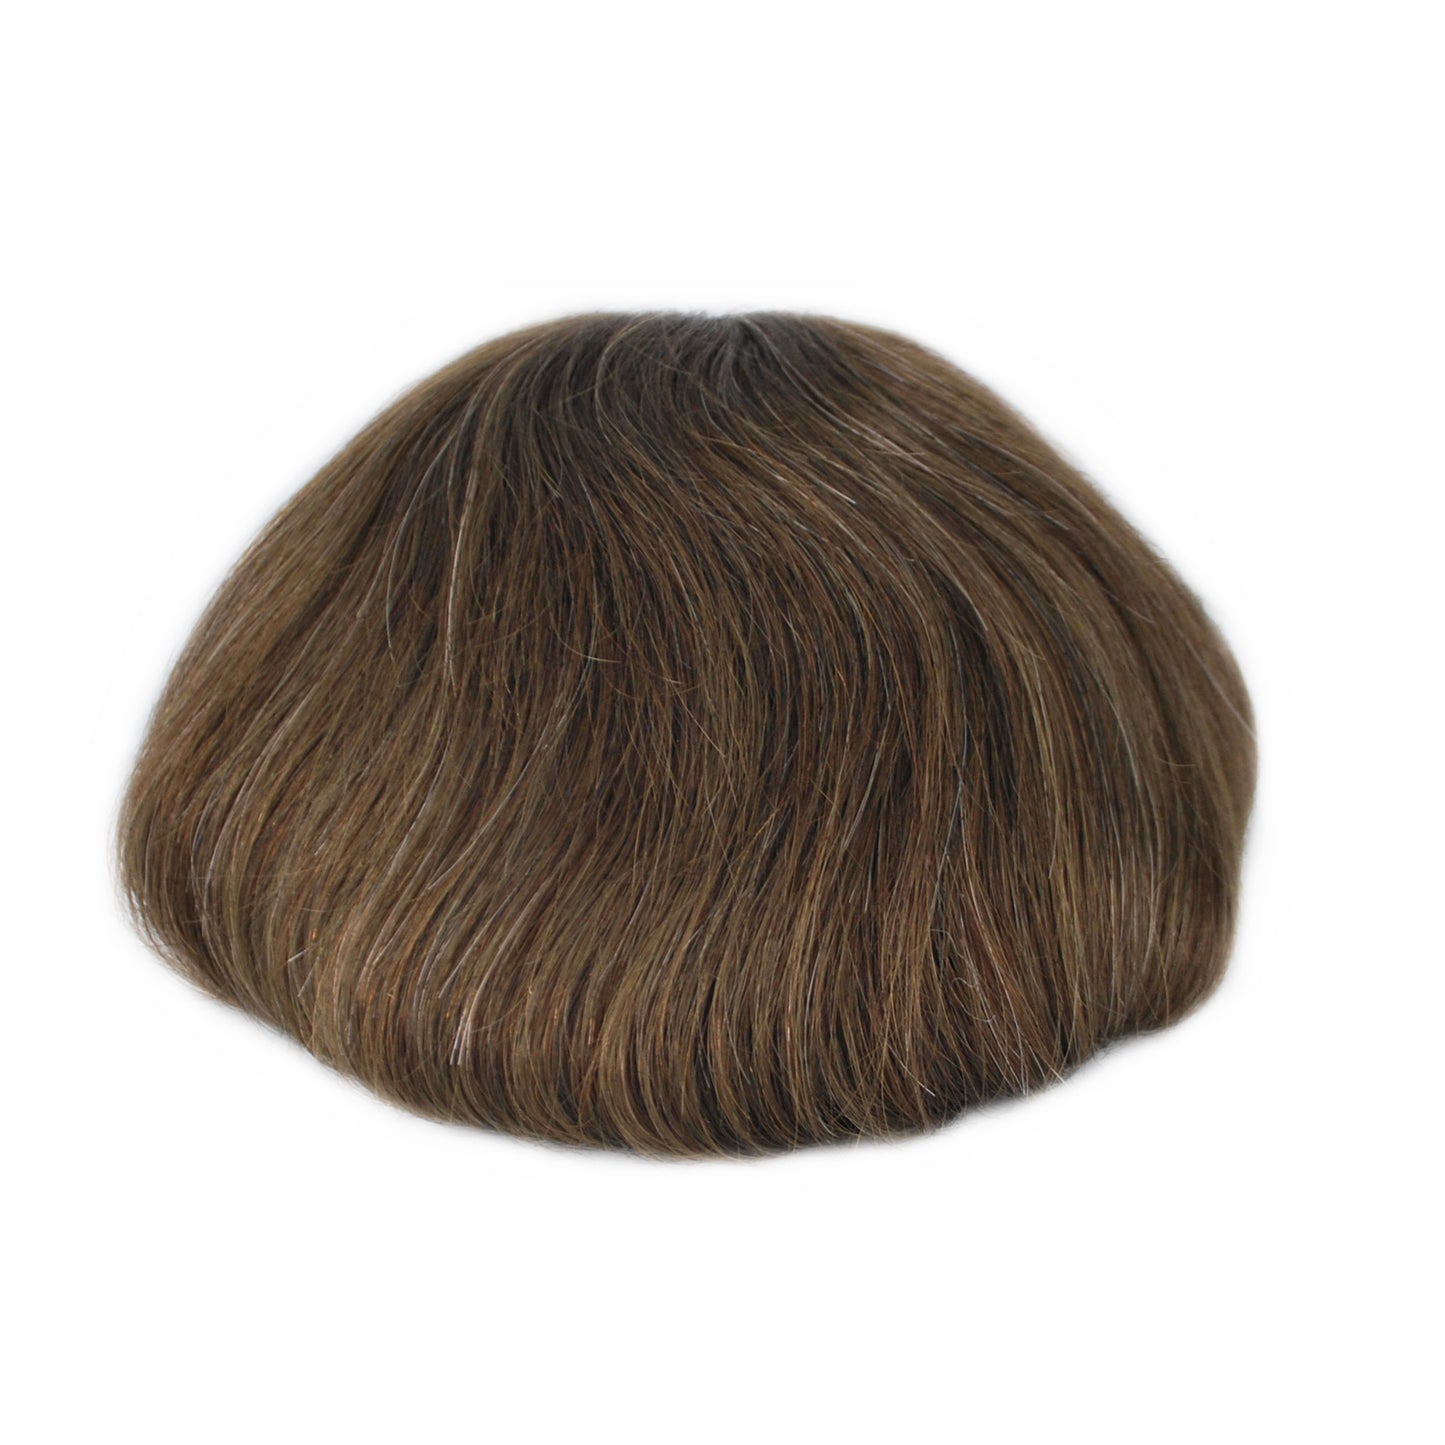 All Swiss lace grey toupee for men french lace with PU around #410 grey hair 10x7.5 Inch